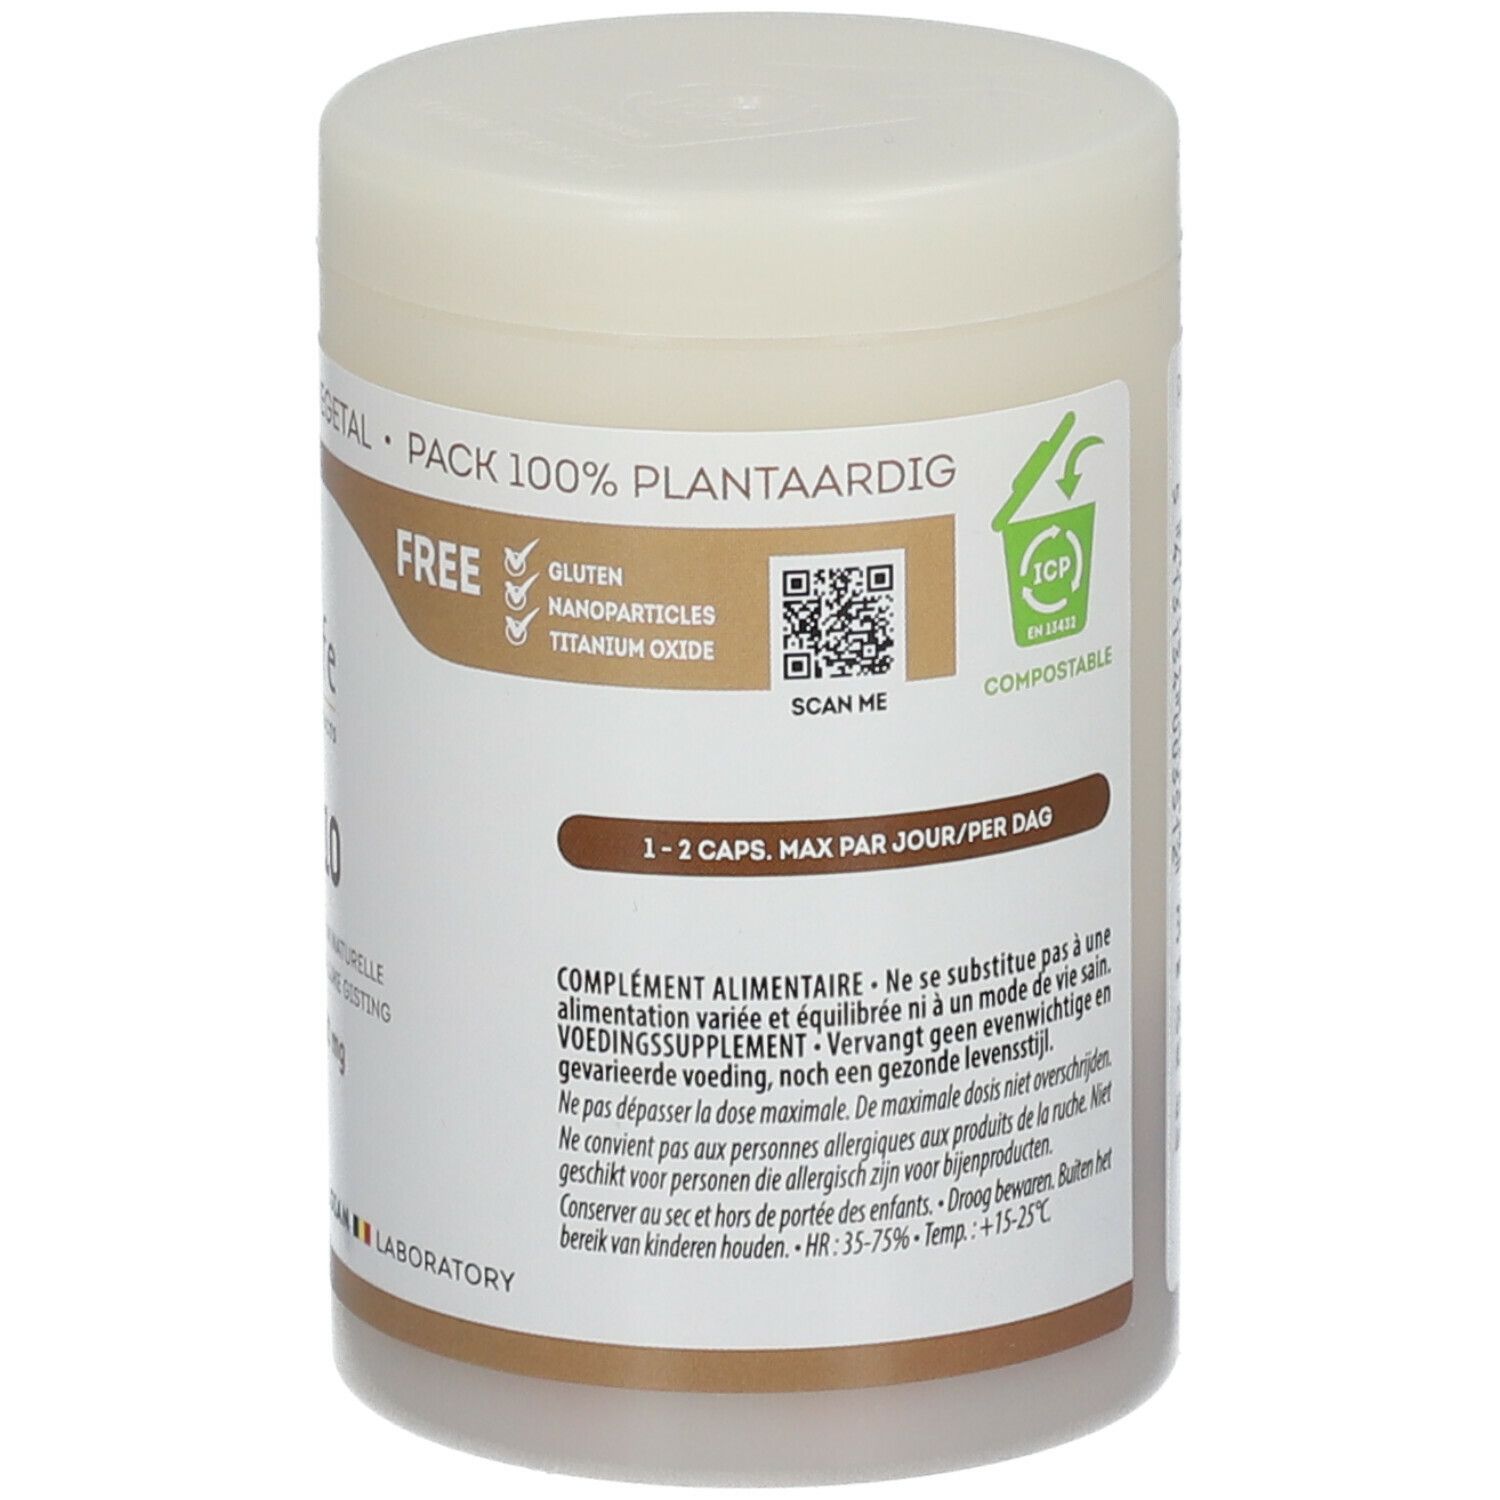 Be-Life Enzyme Co-Q10